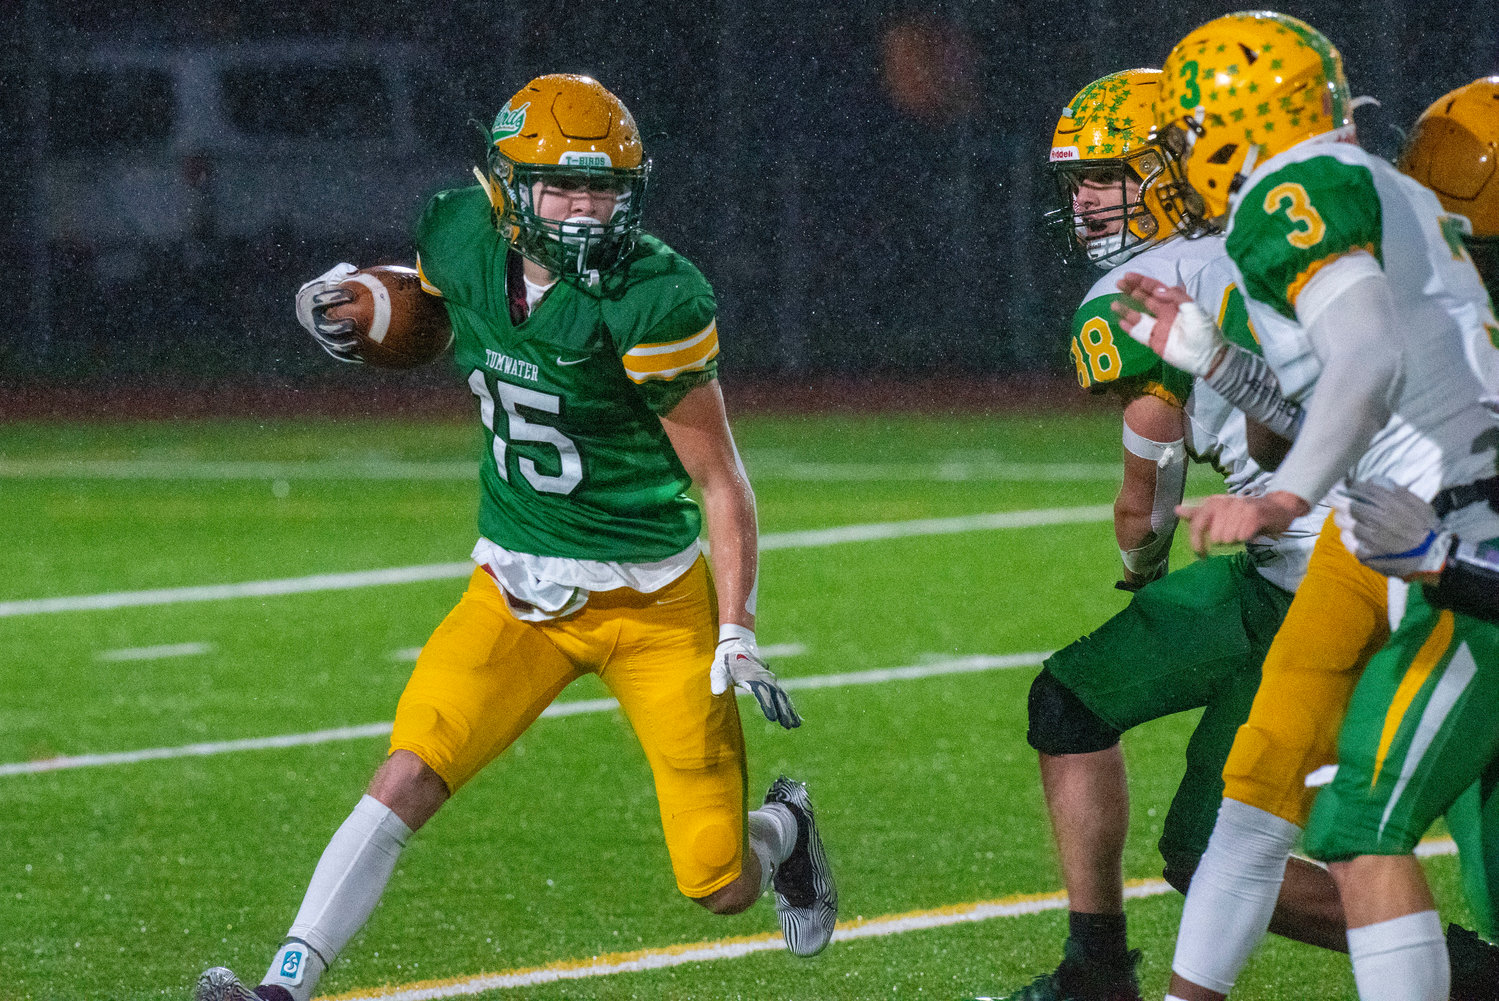 Tumwater’s Ashton Paine looks for running room against Lynden during the 2A state title game on Dec. 4.